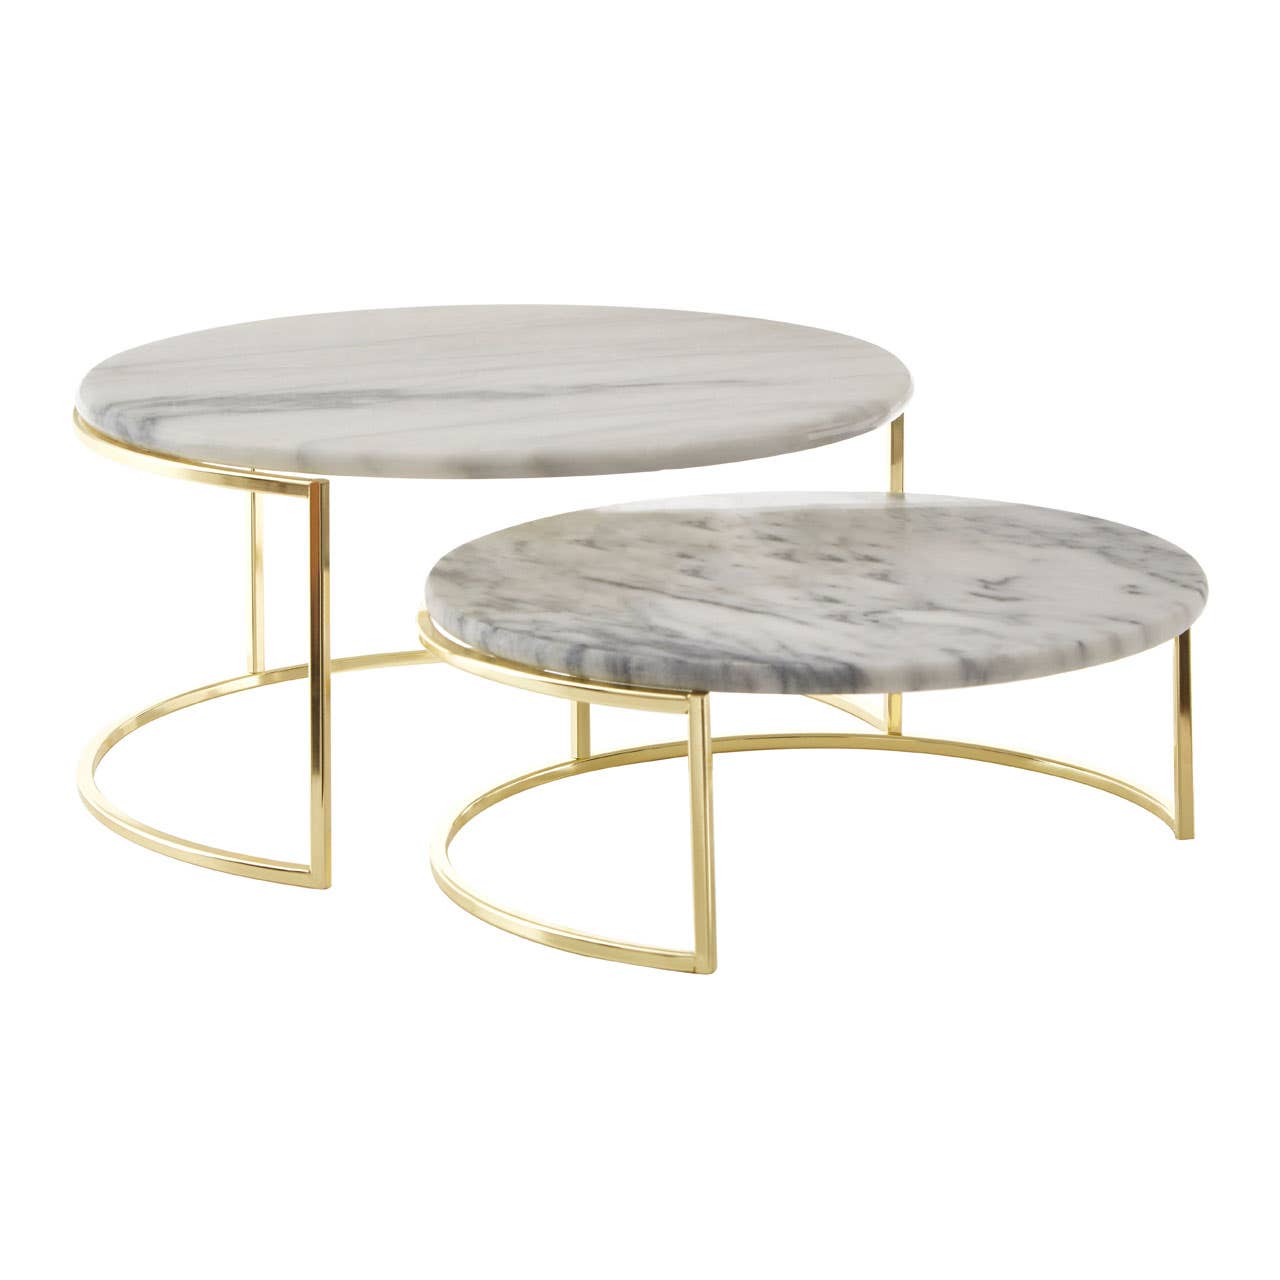 Set Of 2 White Marble Cake Stands